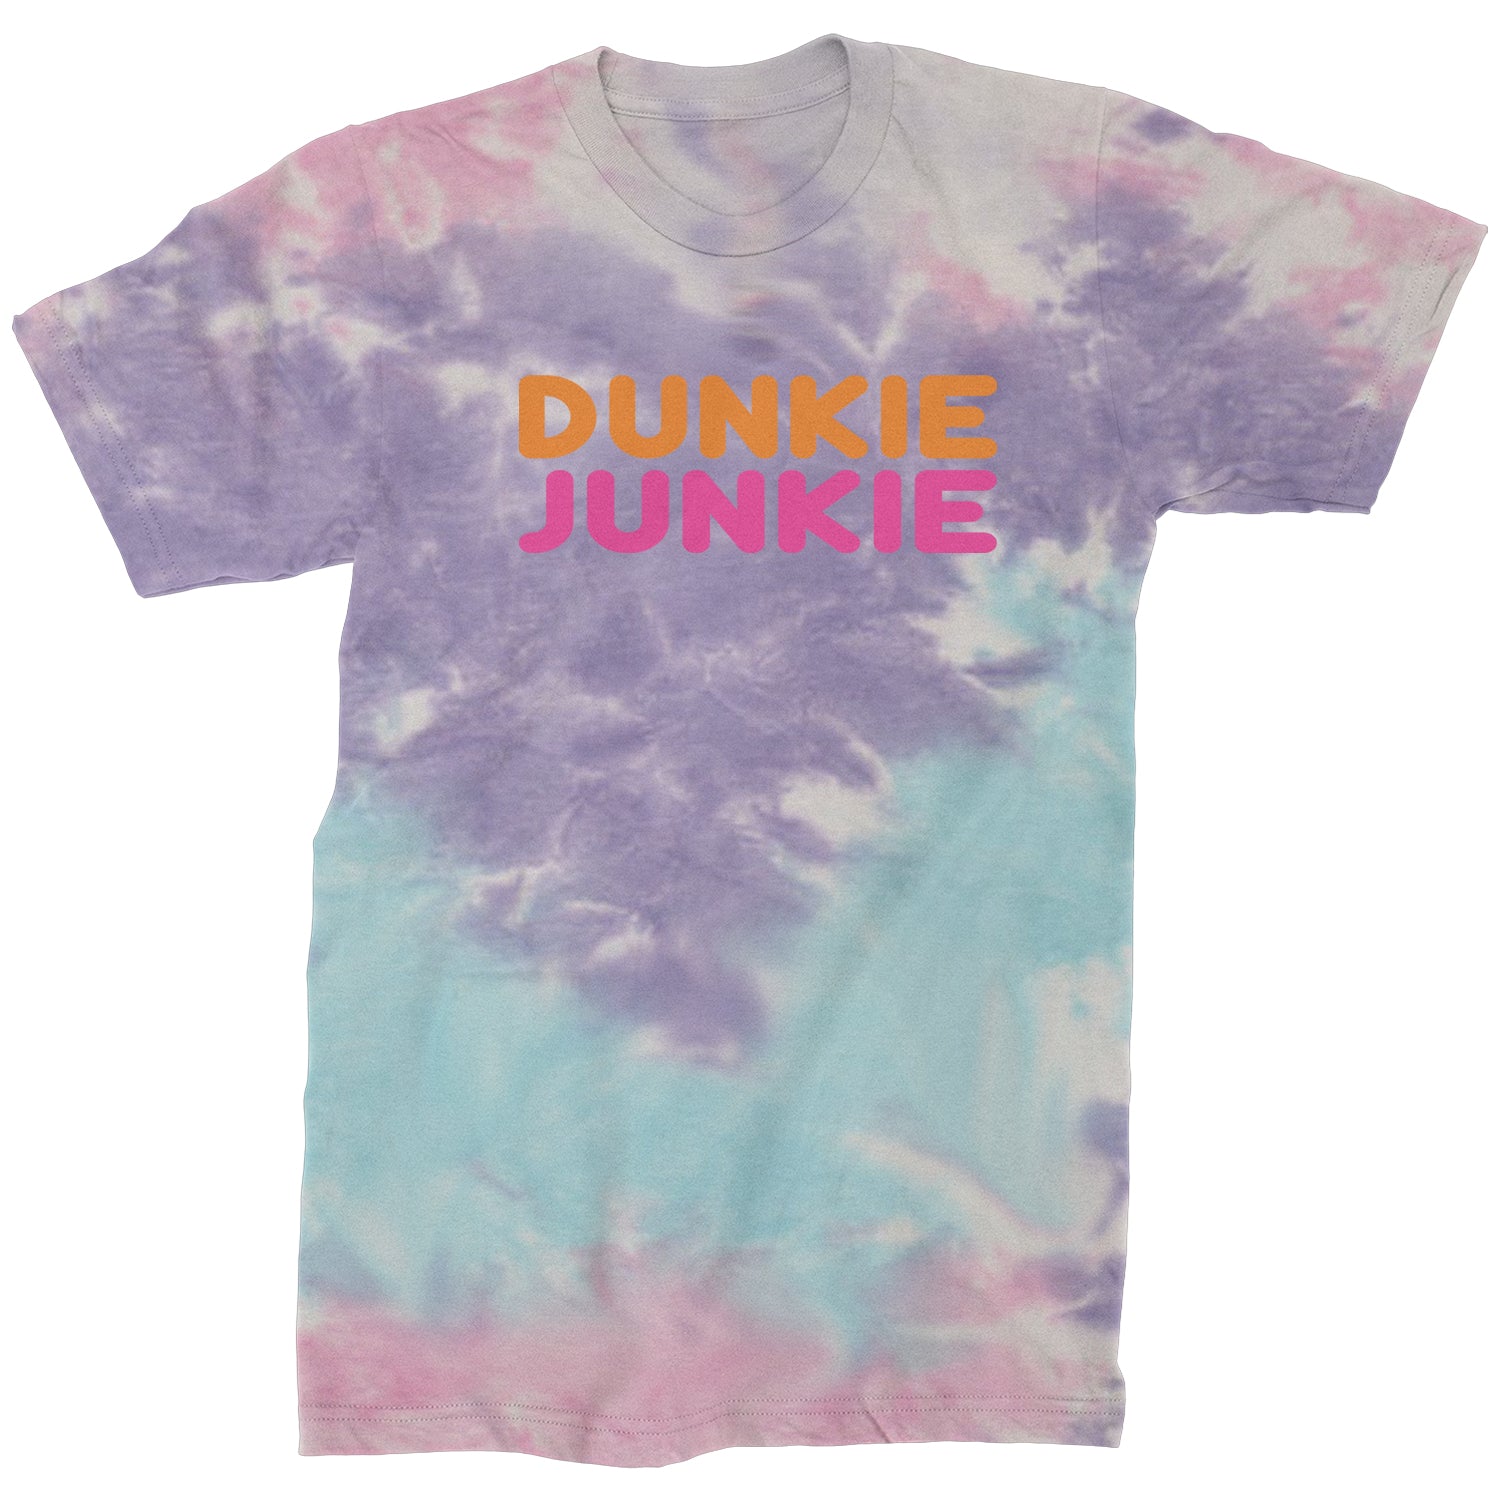 Dunkie Junkie Mens T-shirt addict, capuccino, coffee, dd, dnkn, dunkin, dunking, latte by Expression Tees